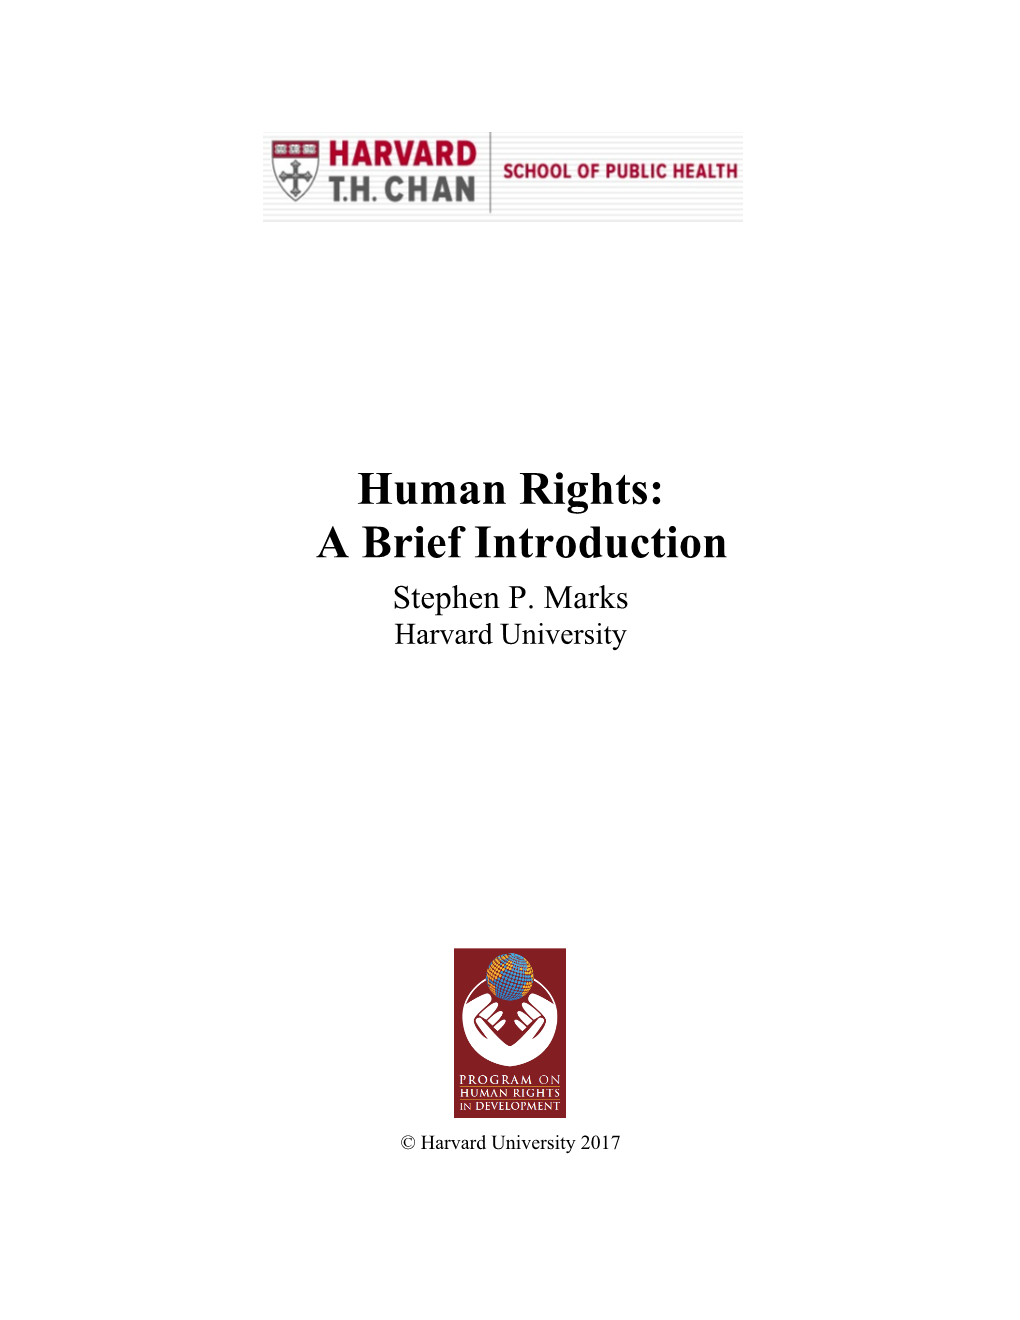 Human Rights: a Brief Introduction Stephen P